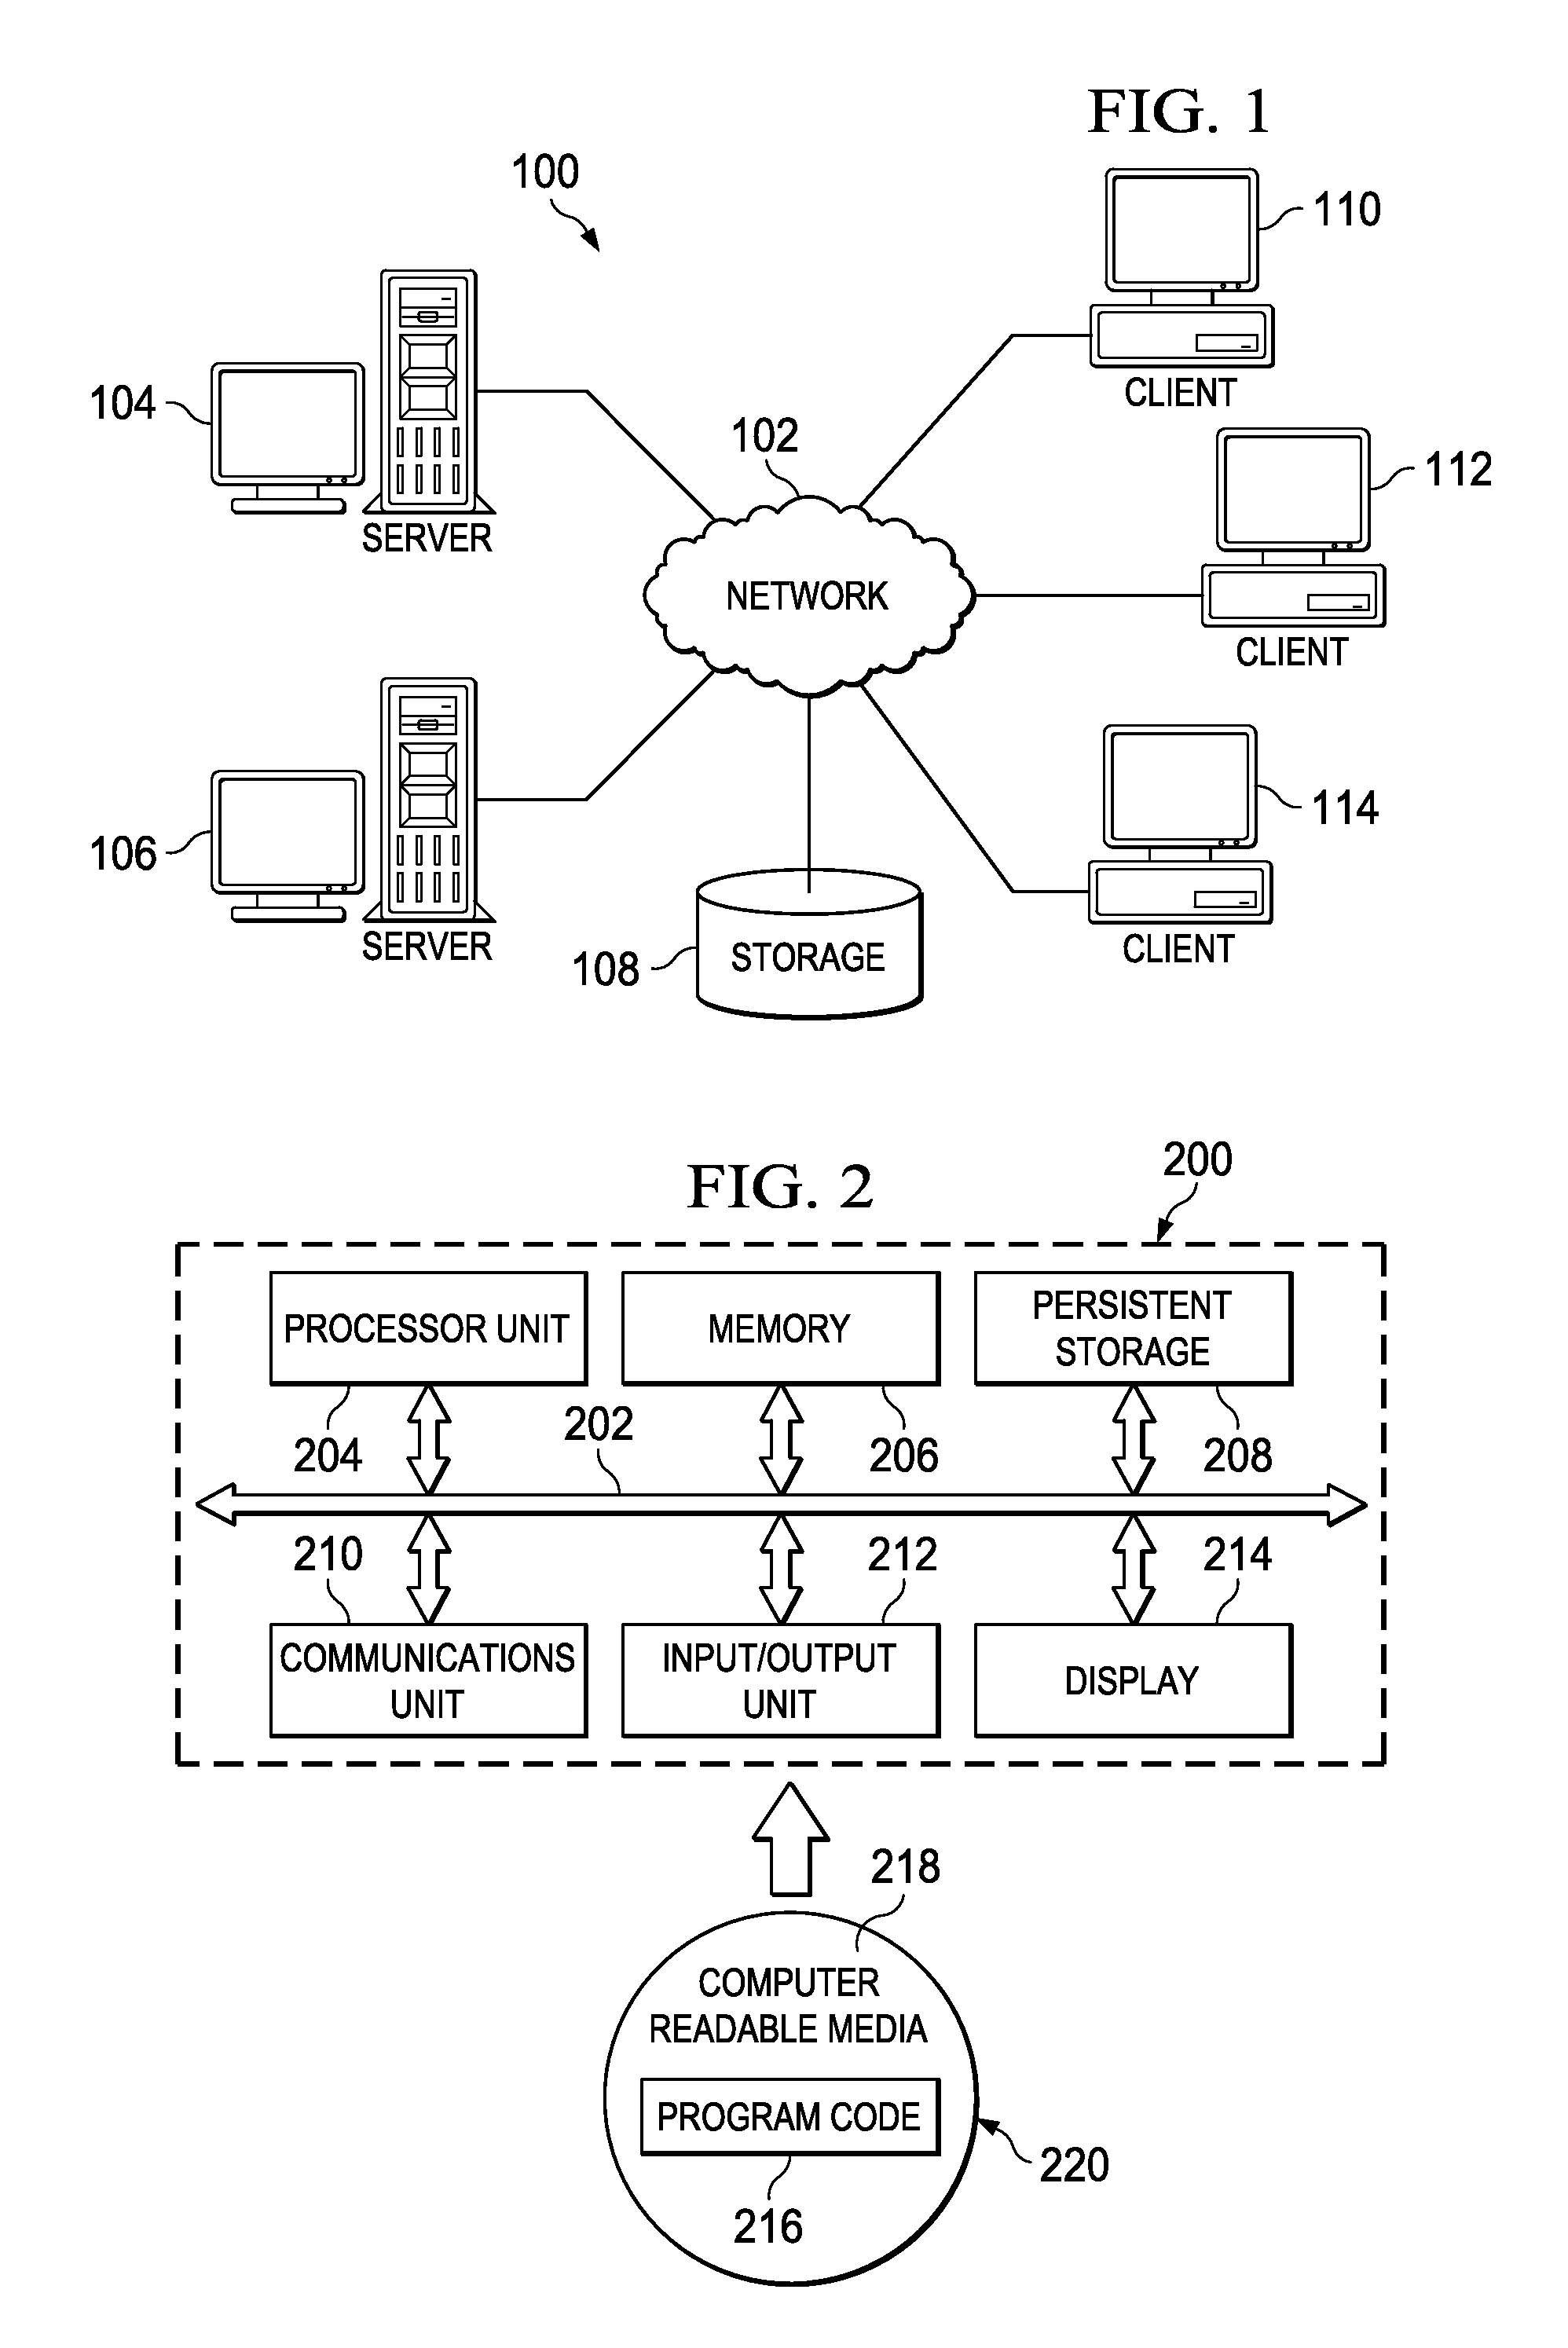 Adding multi-tenant awareness to a network packet processing device on a Software Defined Network (SDN)